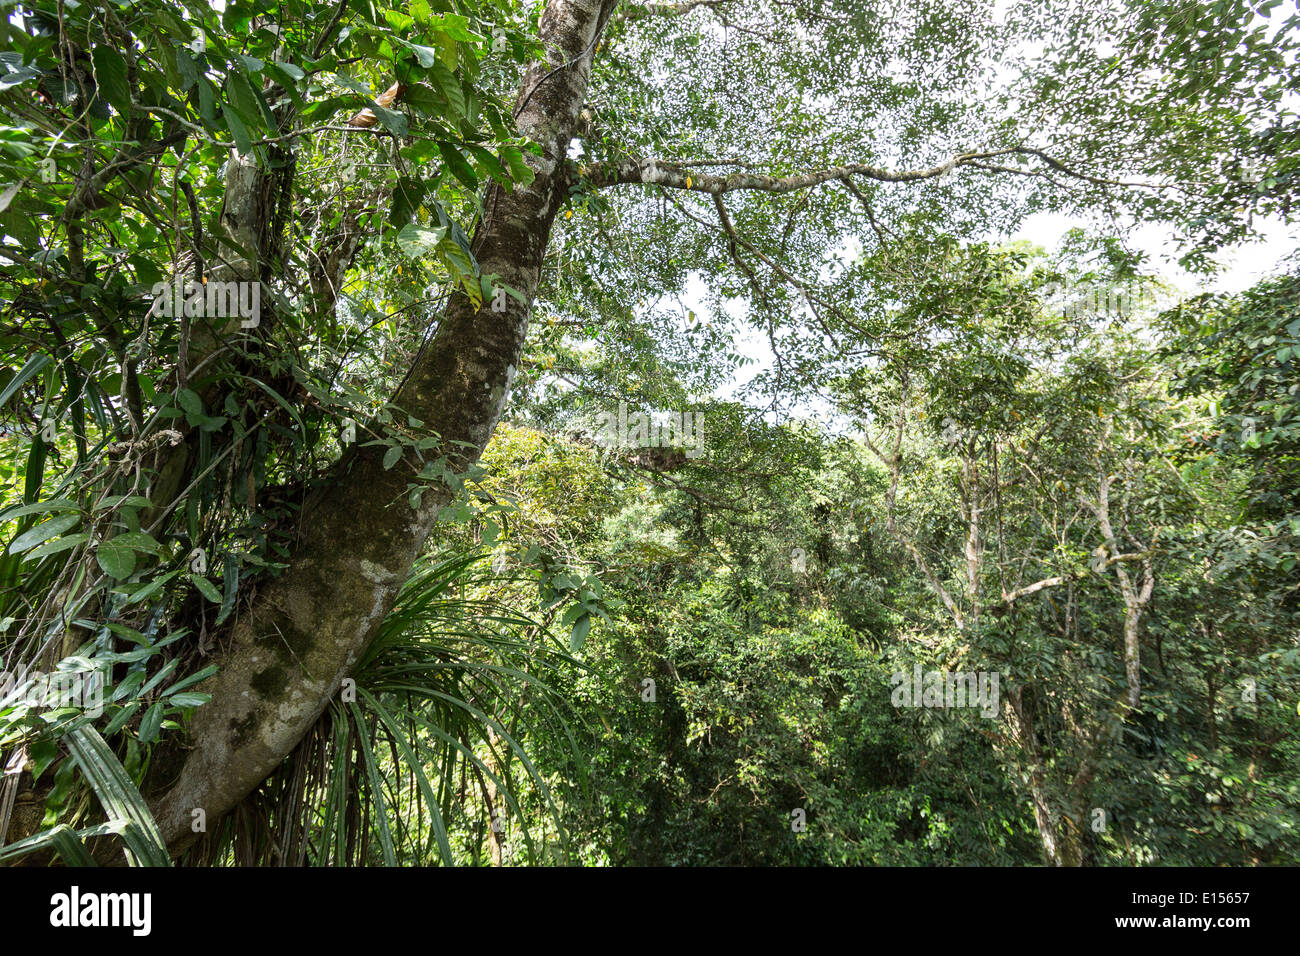 Upper part of rainforest canopy with epiphytes, Gunung Mulu National Park, Malaysia Stock Photo